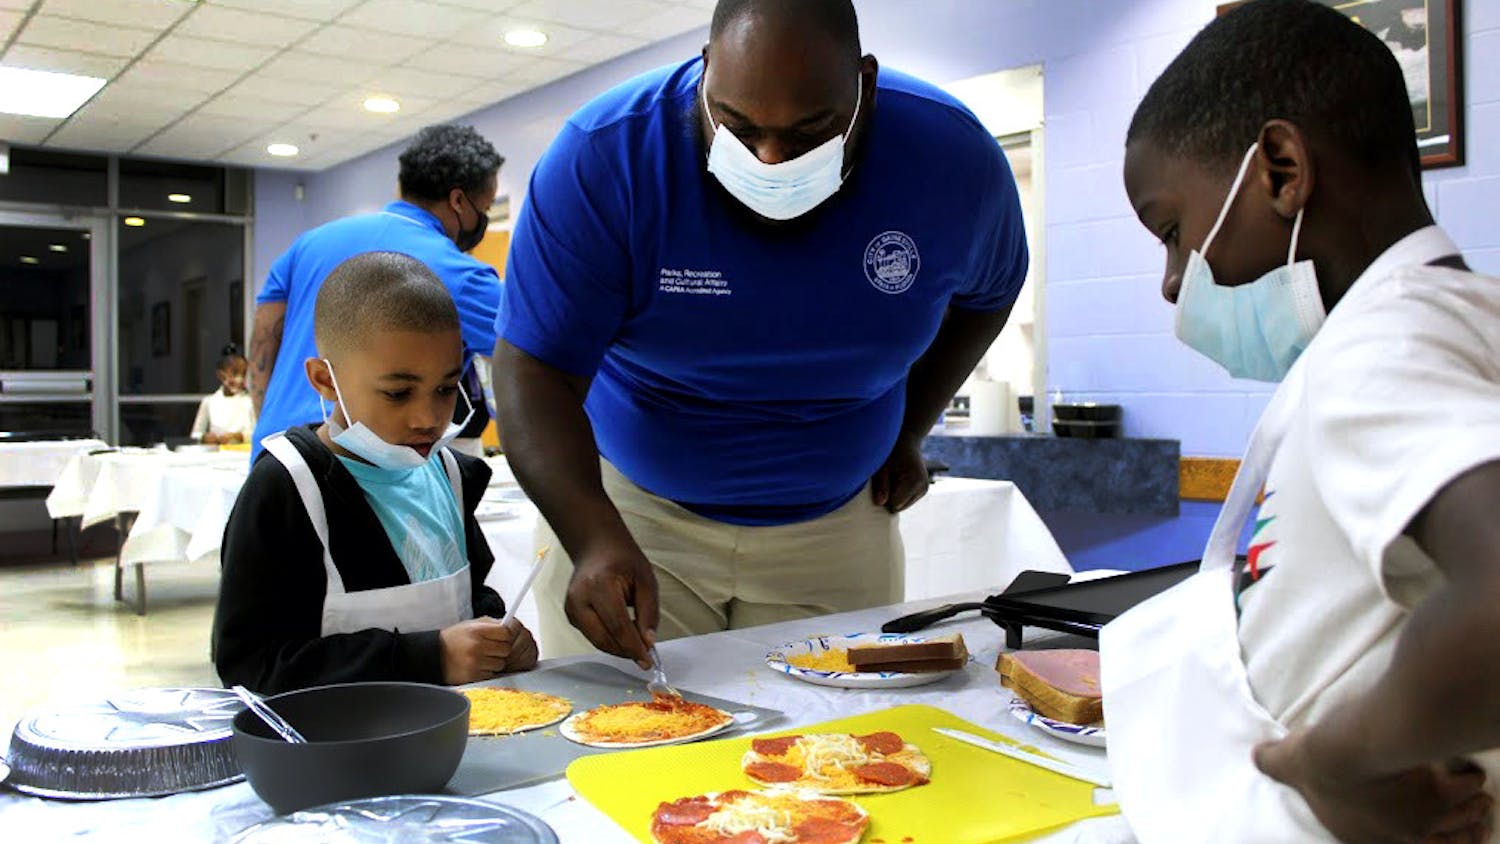 Luis McLeod (middle), recreation aide, helps Cayson Dumas (left), 7, and Jacari Holoie (right), 8, grill pepperoni pizzas at the Eastside Community Center on Monday, Jan. 31.